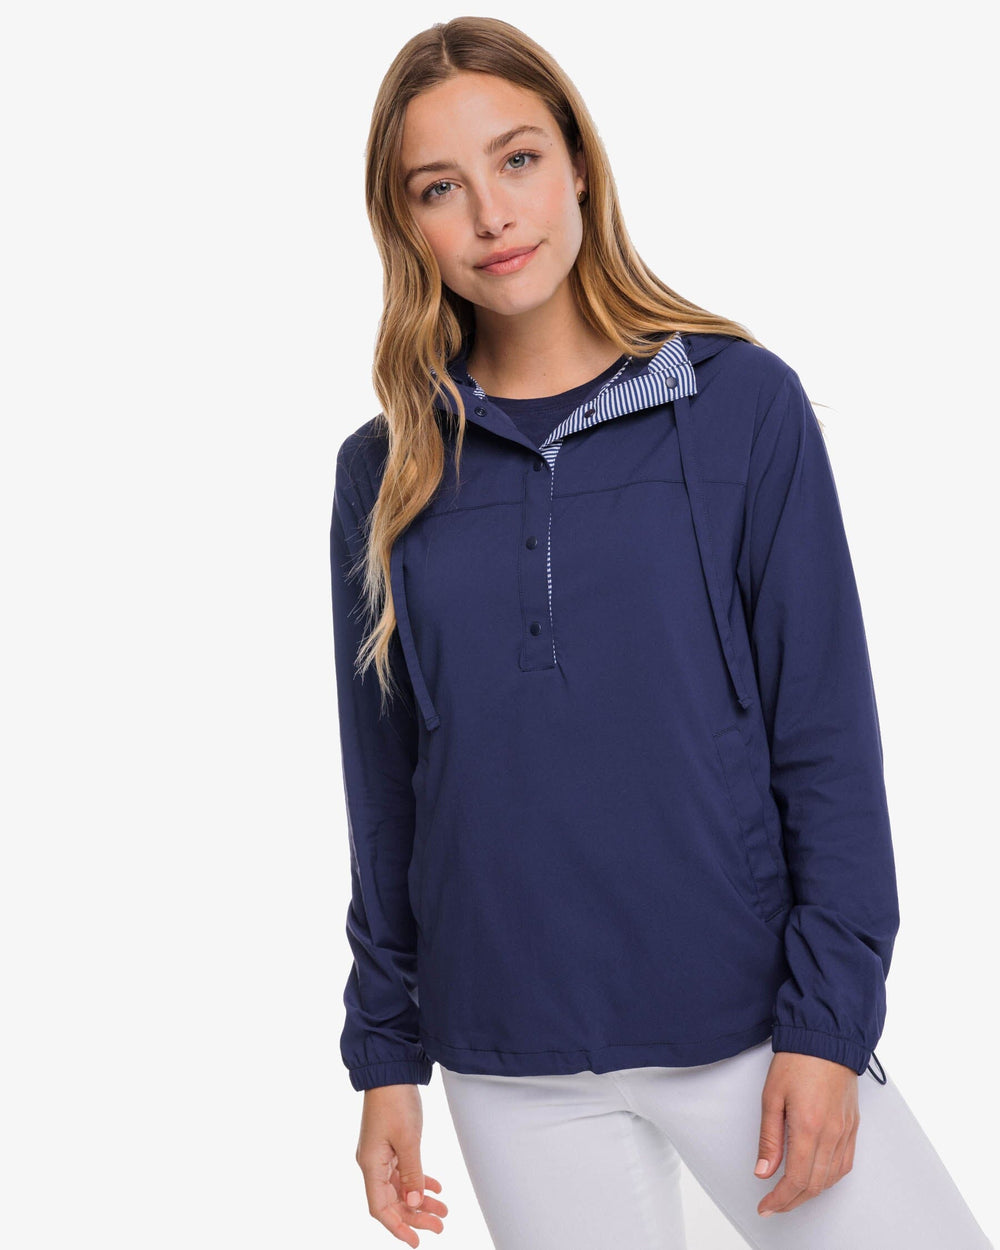 The front view of the Southern Tide Calie Pop Placket Popover by Southern Tide - Nautical Navy